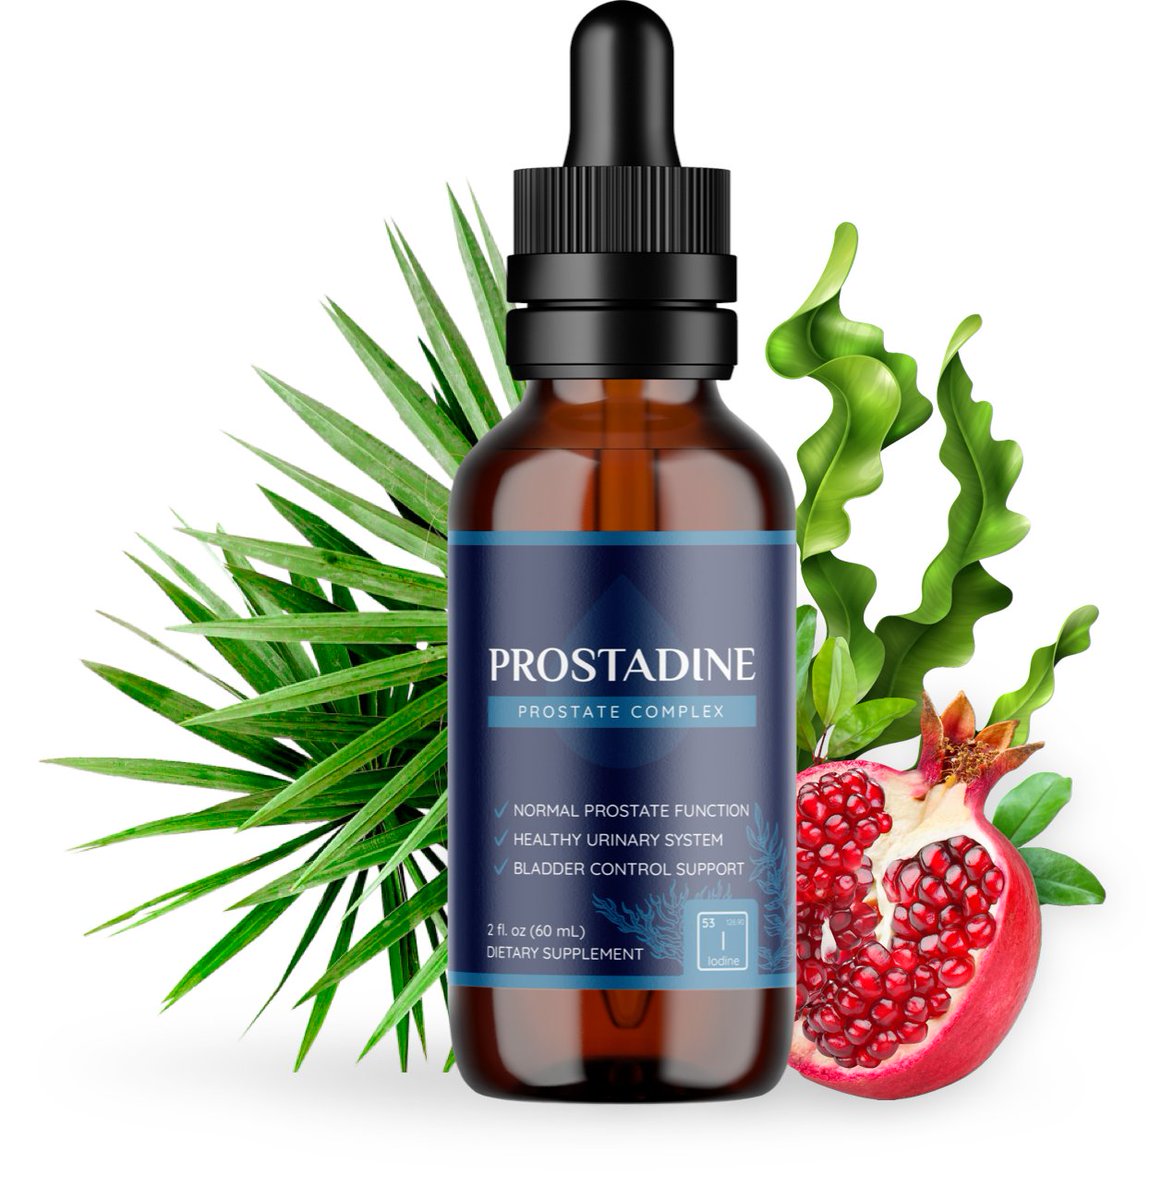 A Comprehensive Look at This Revolutionary Product
#Prostatecancer #Prostateproblems
#https://nexus4wellnesstech.com/a-comprehensive-look-at-this-revolutionary-product/